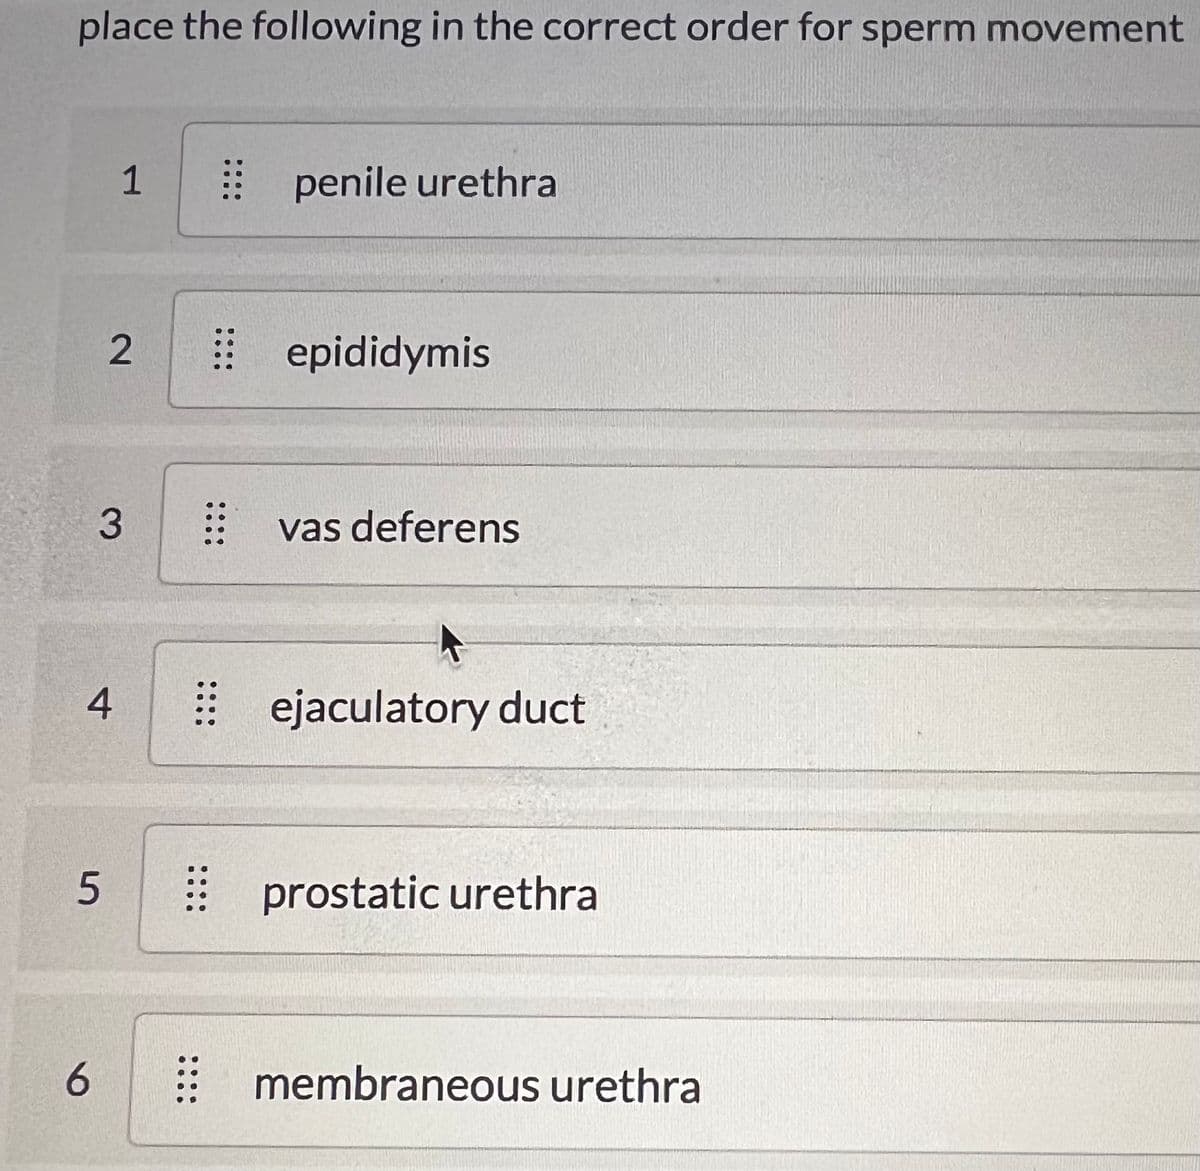 place the following in the correct order for sperm movement
4
5
6
1
2
3
⠀ penile urethra
epididymis
⠀⠀ vas deferens
ejaculatory duct
:: prostatic urethra
membraneous urethra